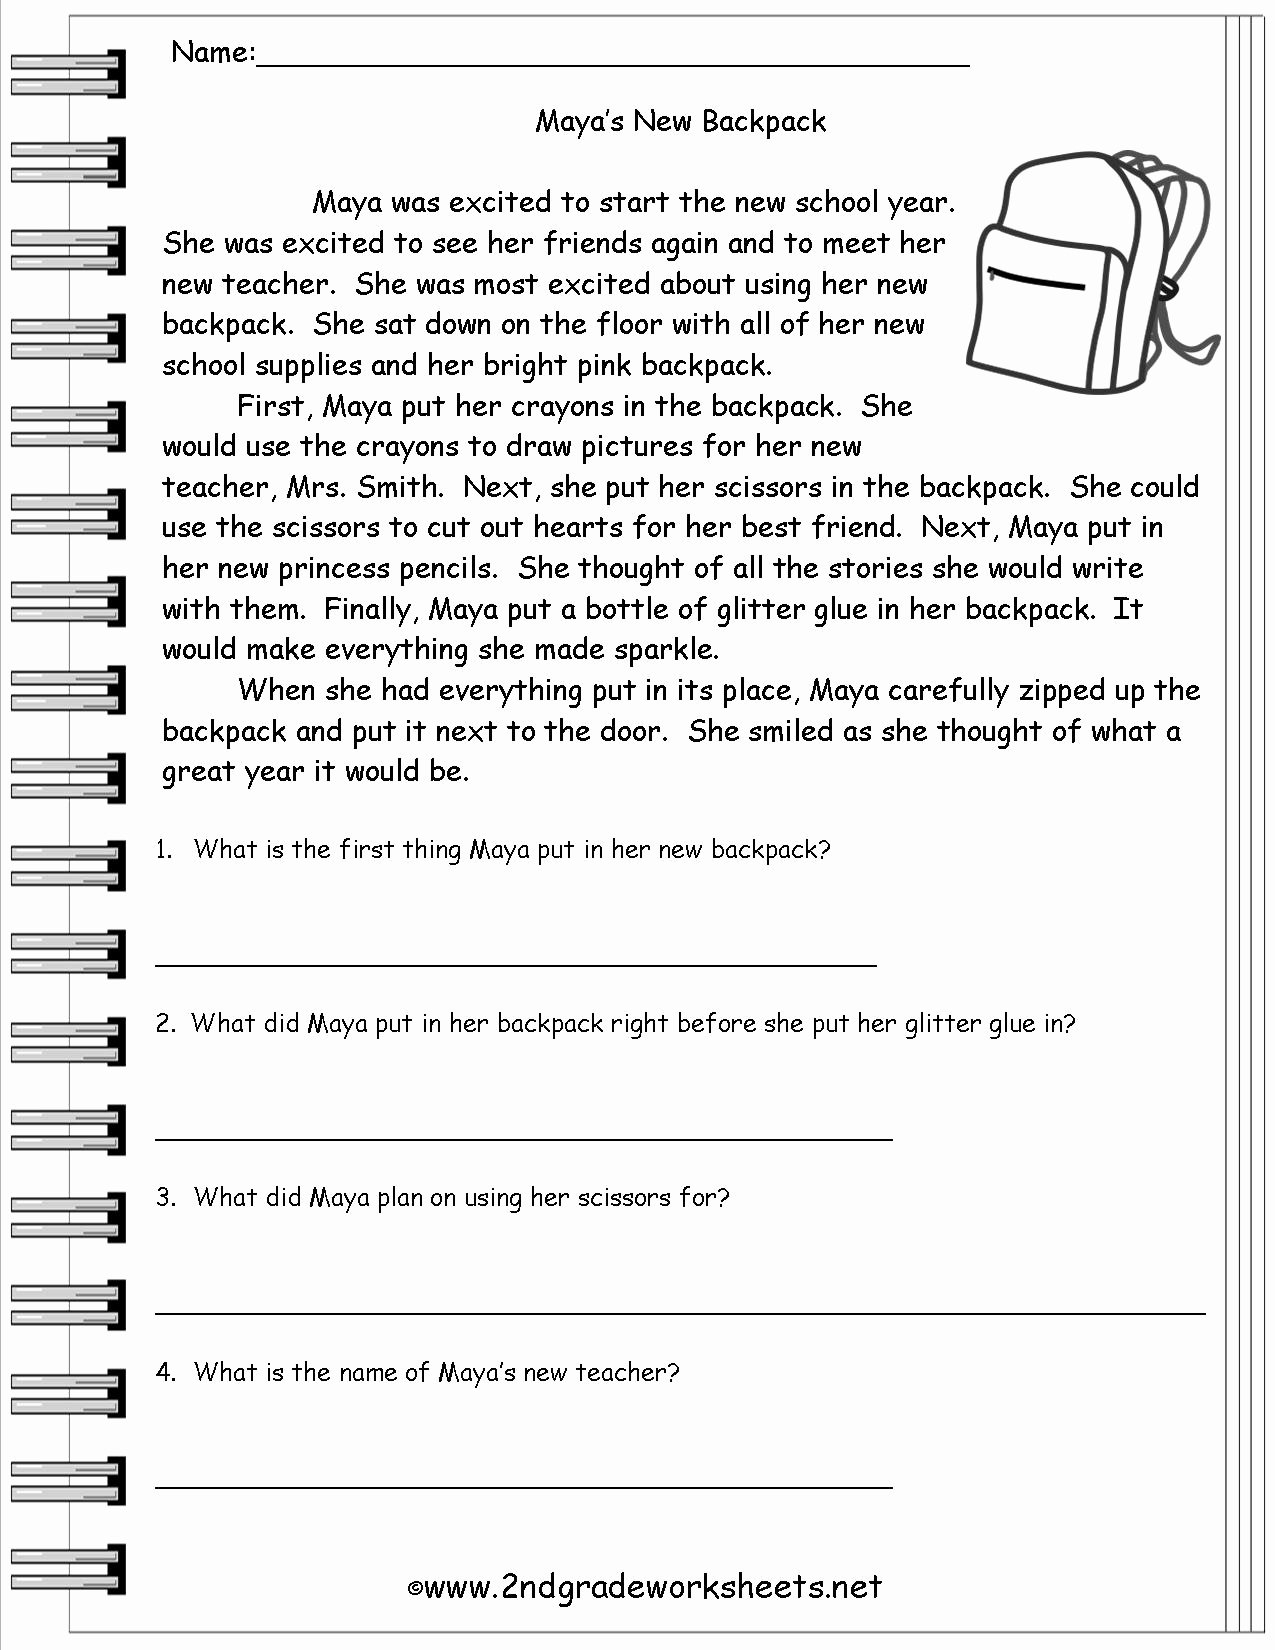 20 Free 4Th Grade Reading Comprehension Worksheets Multiple Choice Throughout 3Rd Grade Reading Comprehension Worksheets Multiple Choice